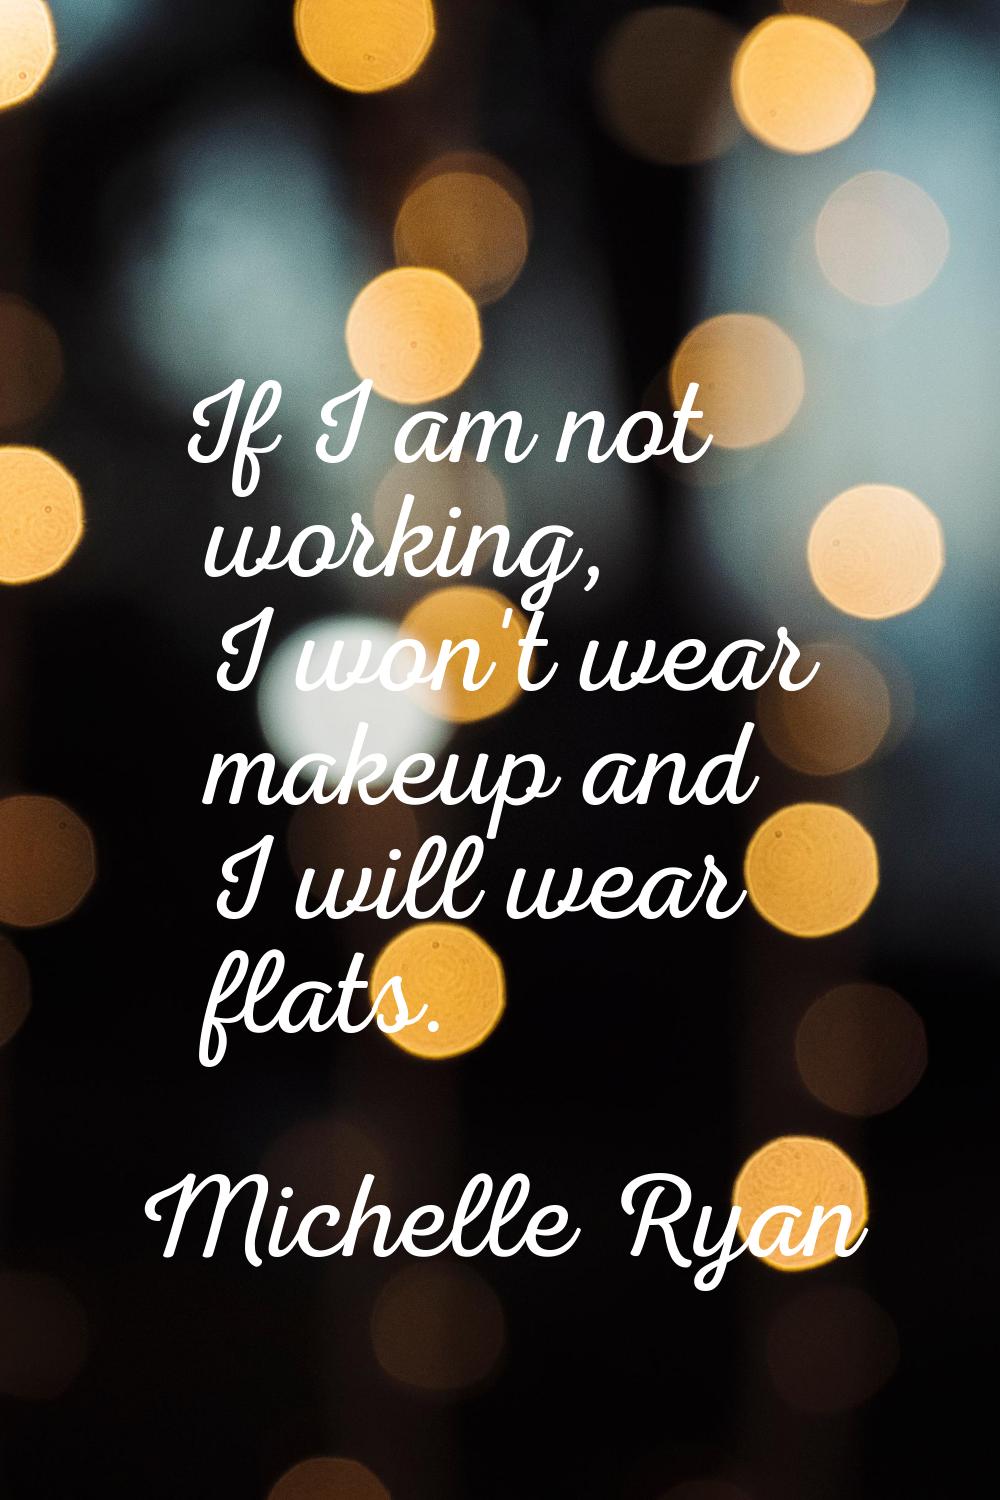 If I am not working, I won't wear makeup and I will wear flats.